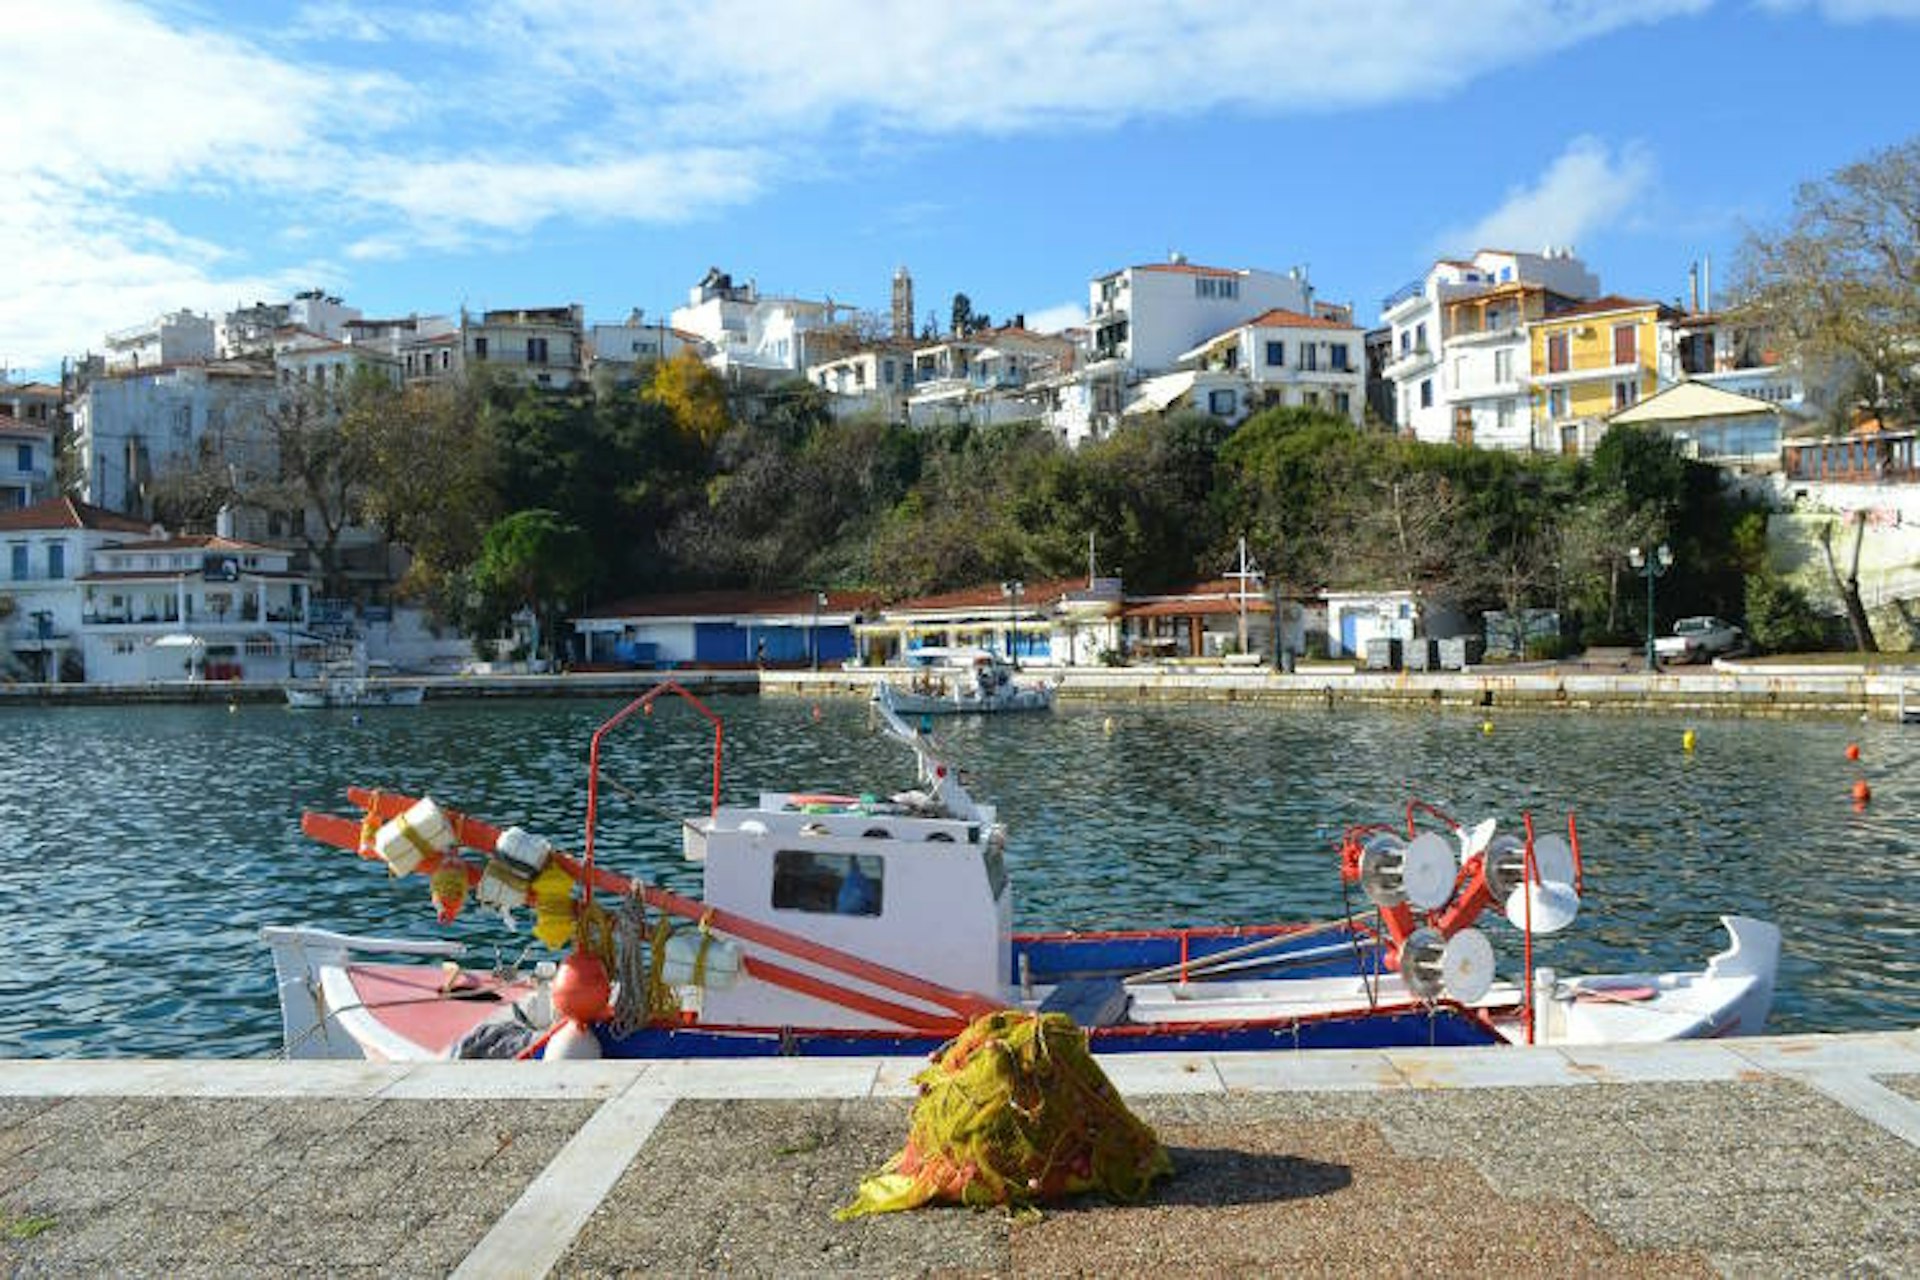 The old port of Skiathos in the Sporades, where several scenes from Mama Mia! were shot. Image by Alexis Averbuck / Lonely Planet